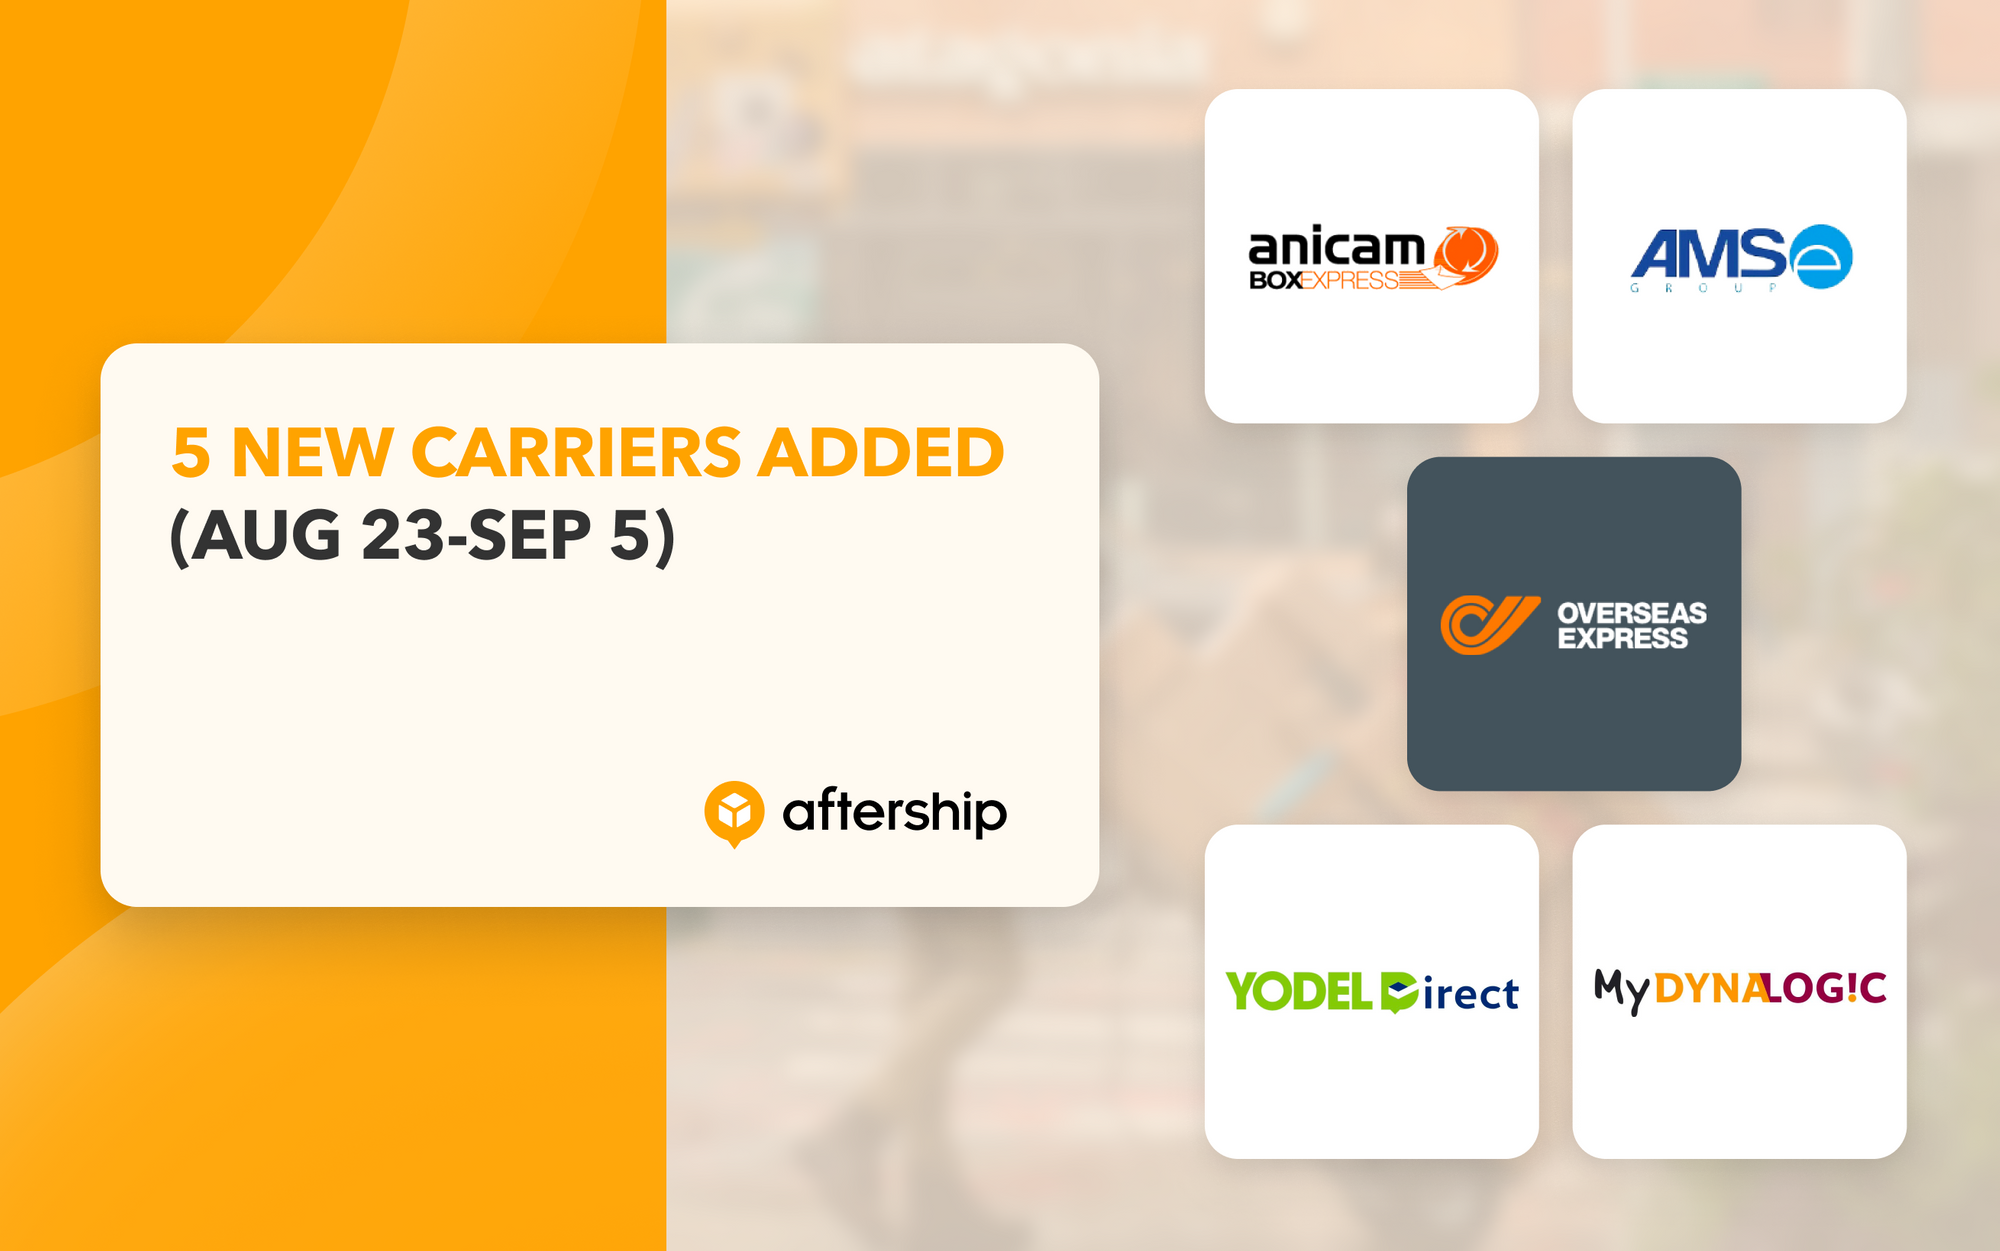 AfterShip adds 5 new couriers in the last two weeks (23rd August 2021 to 5th September 2021